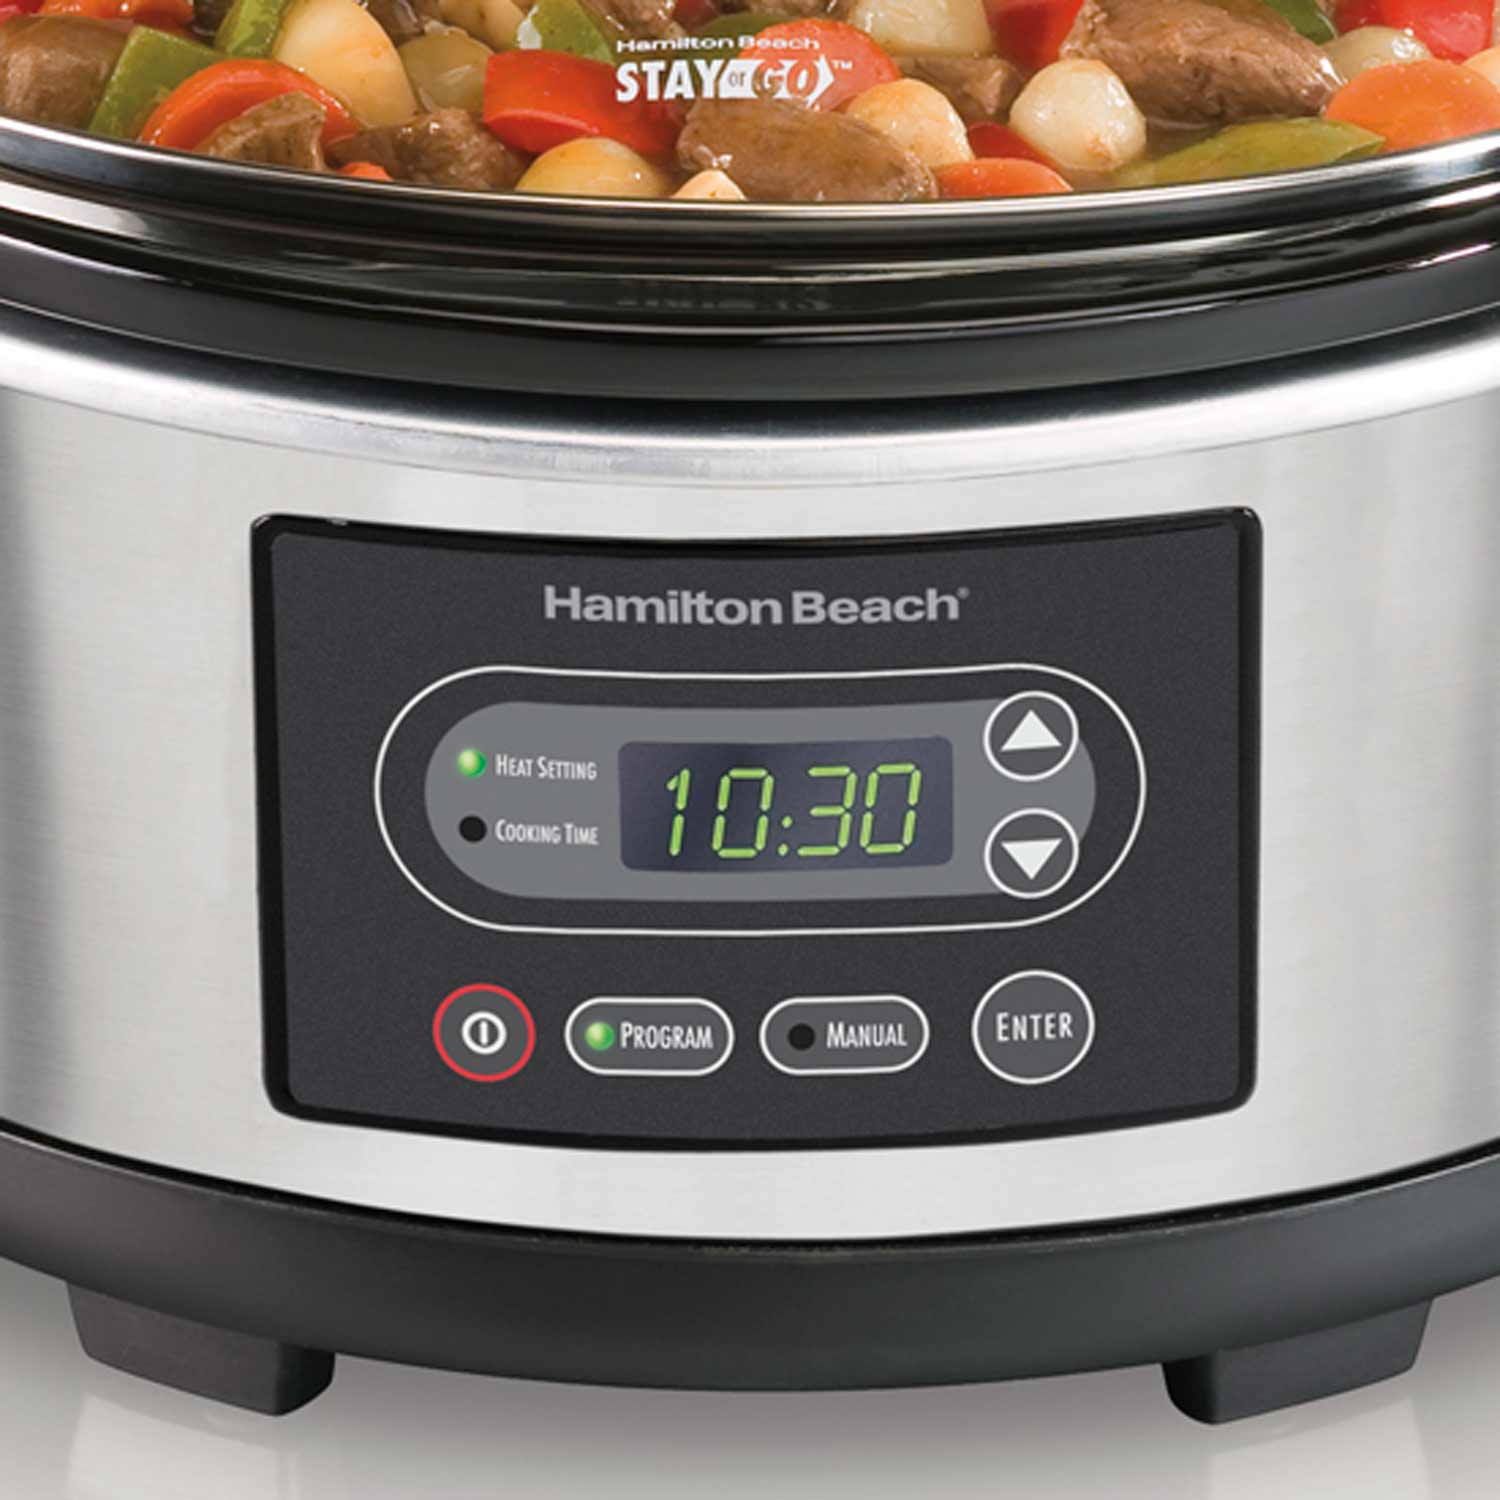 Hamilton Beach Stay Or Go 5 Qt. Programmable Slow Cooker